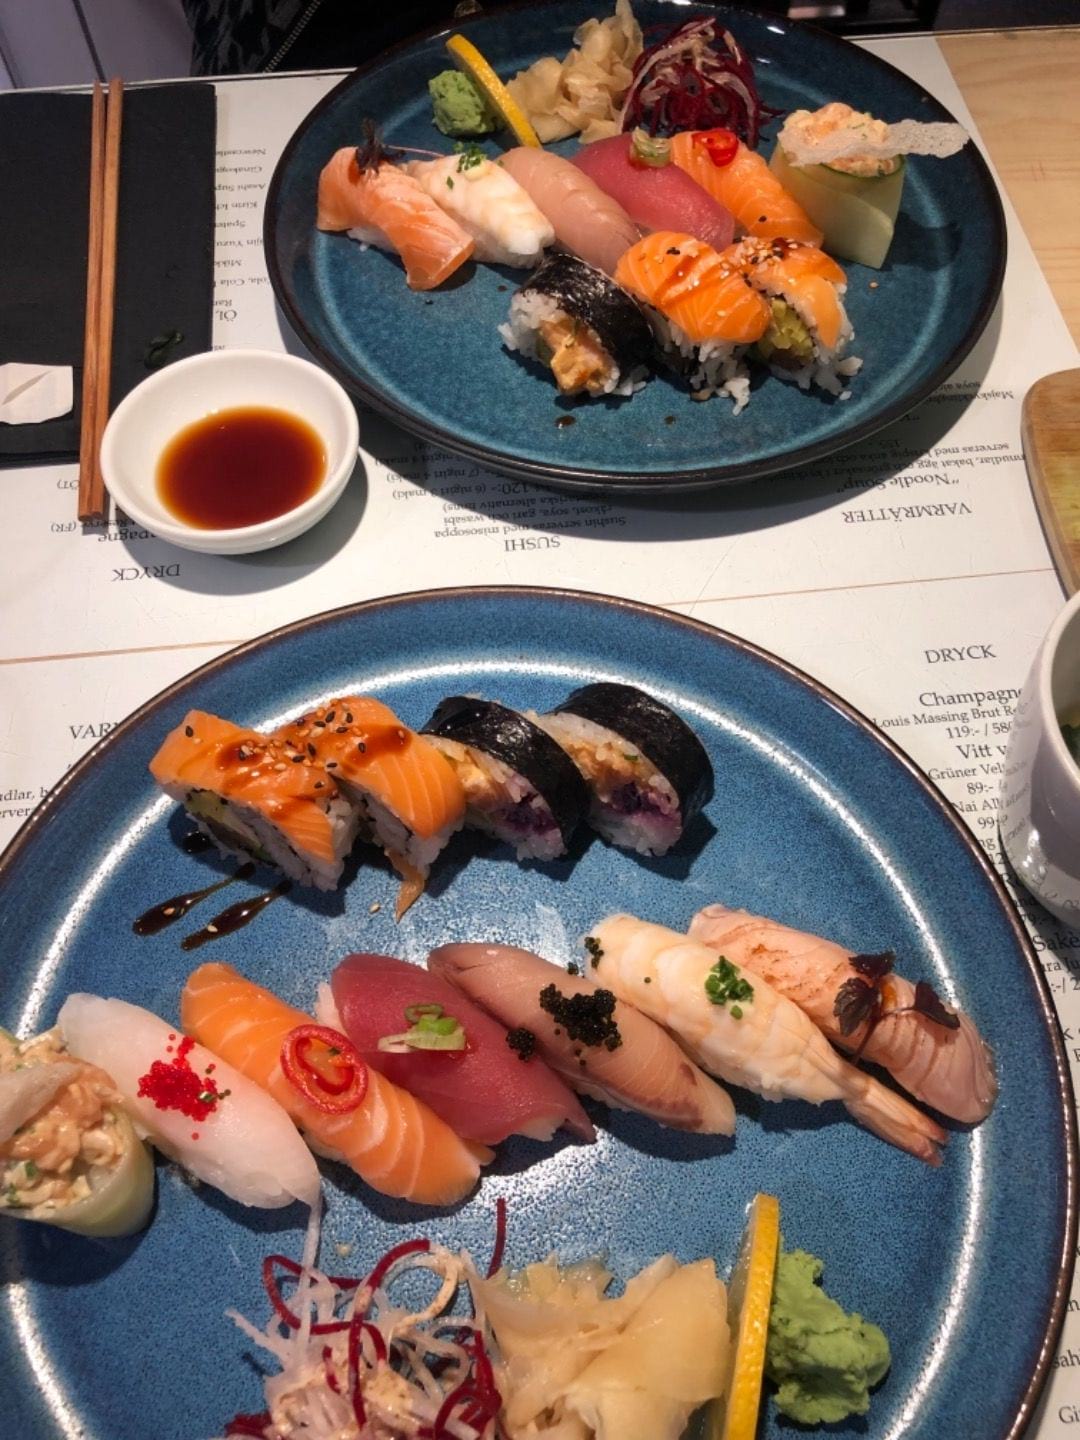 Photo from Tokyo Diner by Mythu L. (27/04/2019)